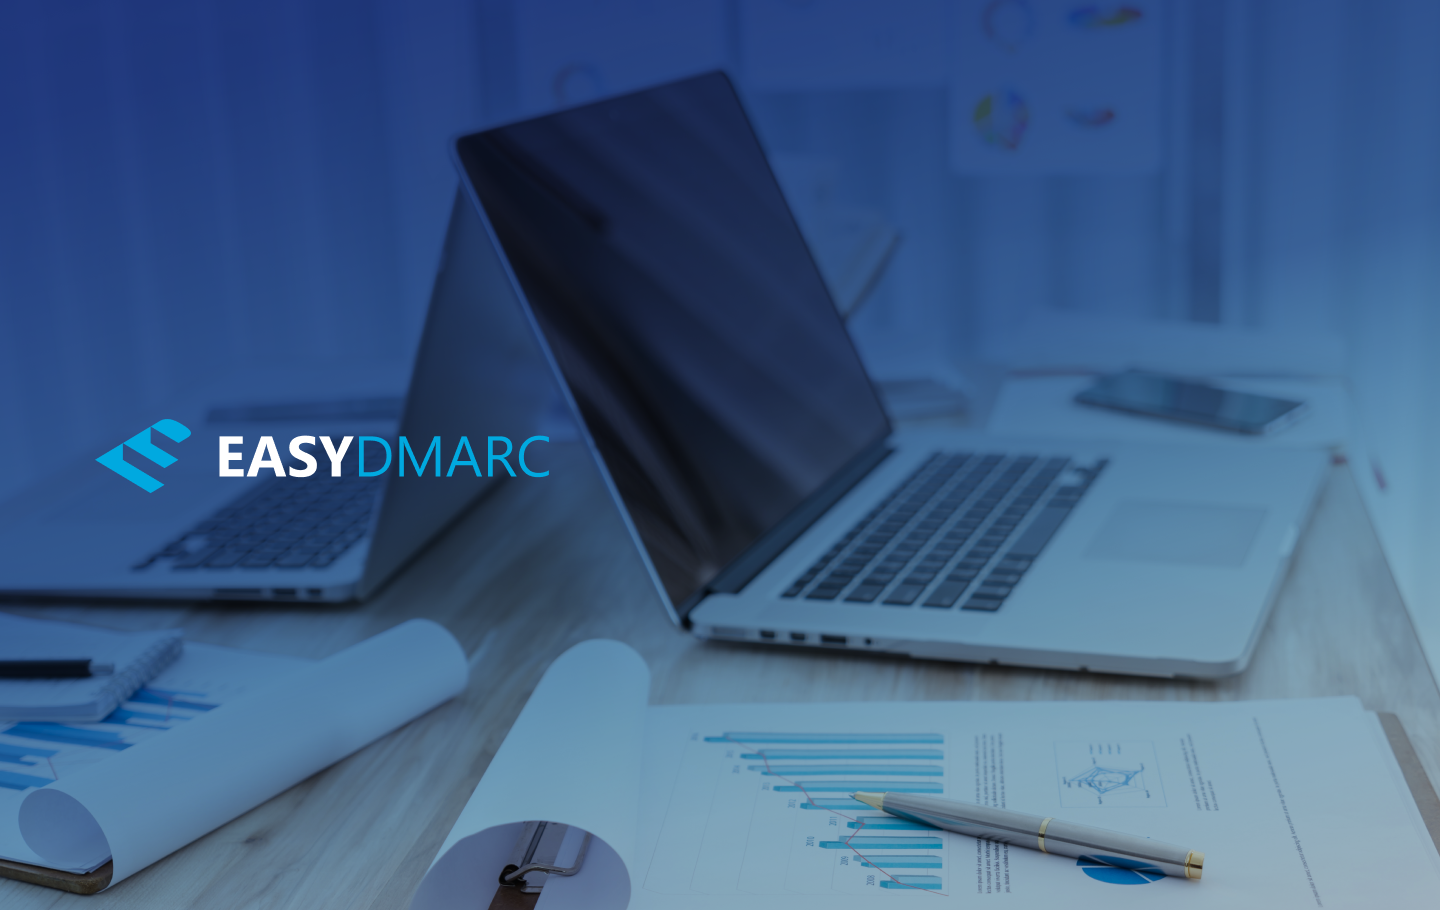 two laptops on a desk full of papers and pens,picture covered with the EasyDMARC logo